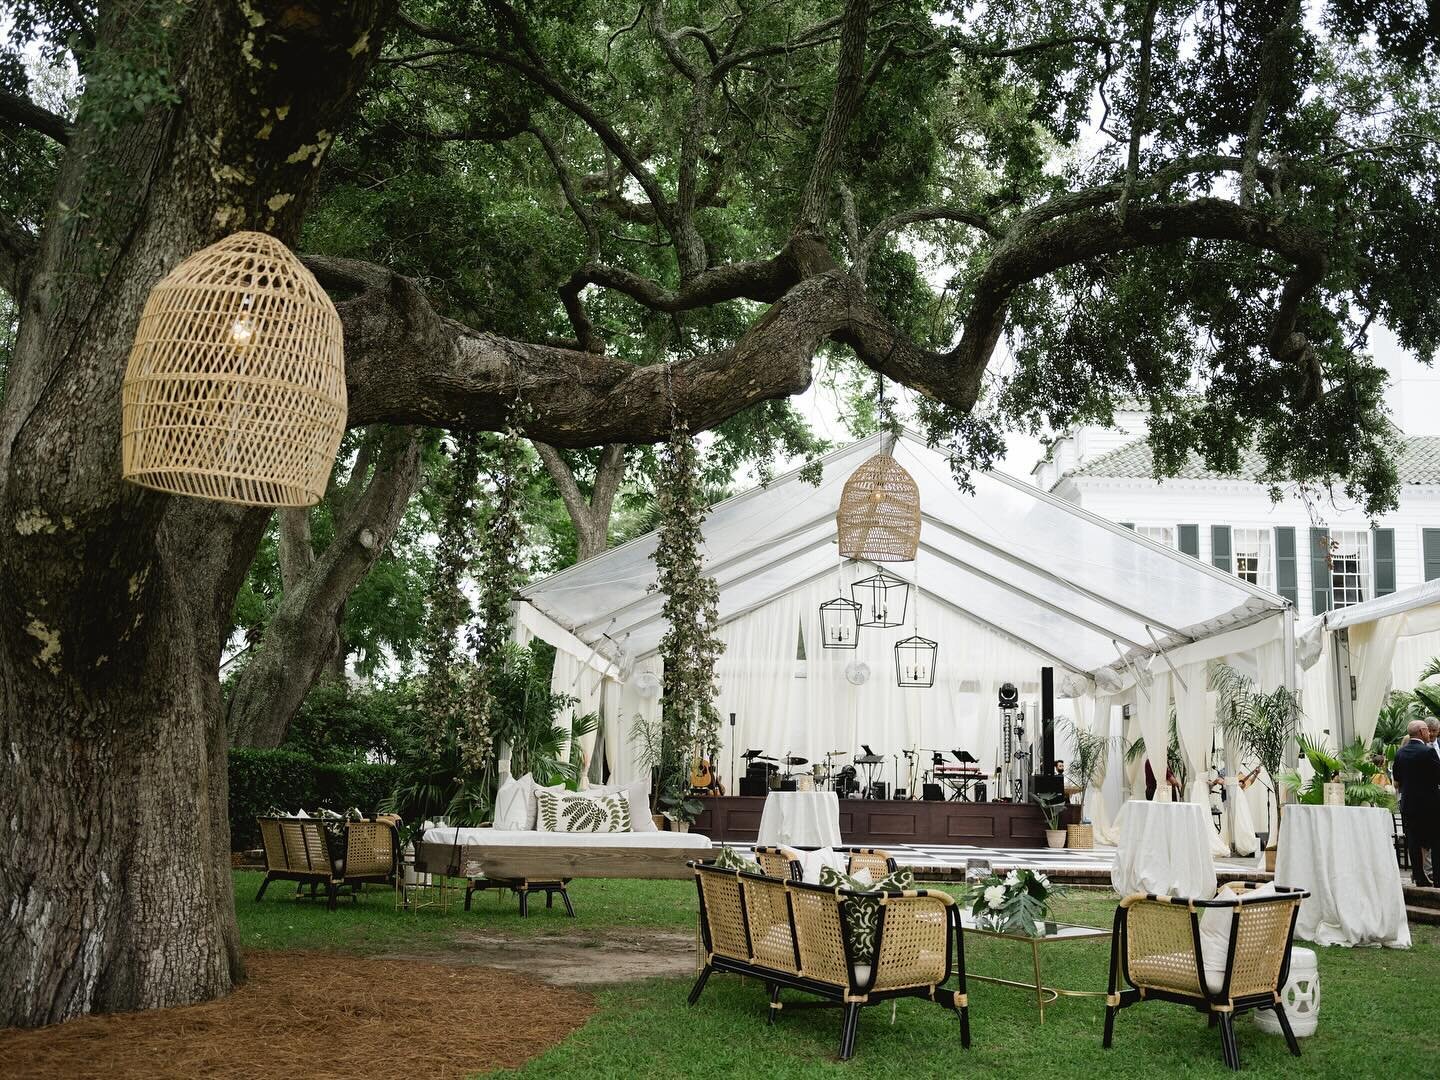 Bringing the outside, in!🌿Opting for an open gable tent design allows for a seamless transition for all guests to enjoy the beautiful grounds of Lowndes Grove. 
.
.
.
Photo: @virgilbunao 
Floral: @sygdesigns 
Venue: @pphgevents 
Rentals: @snydereven